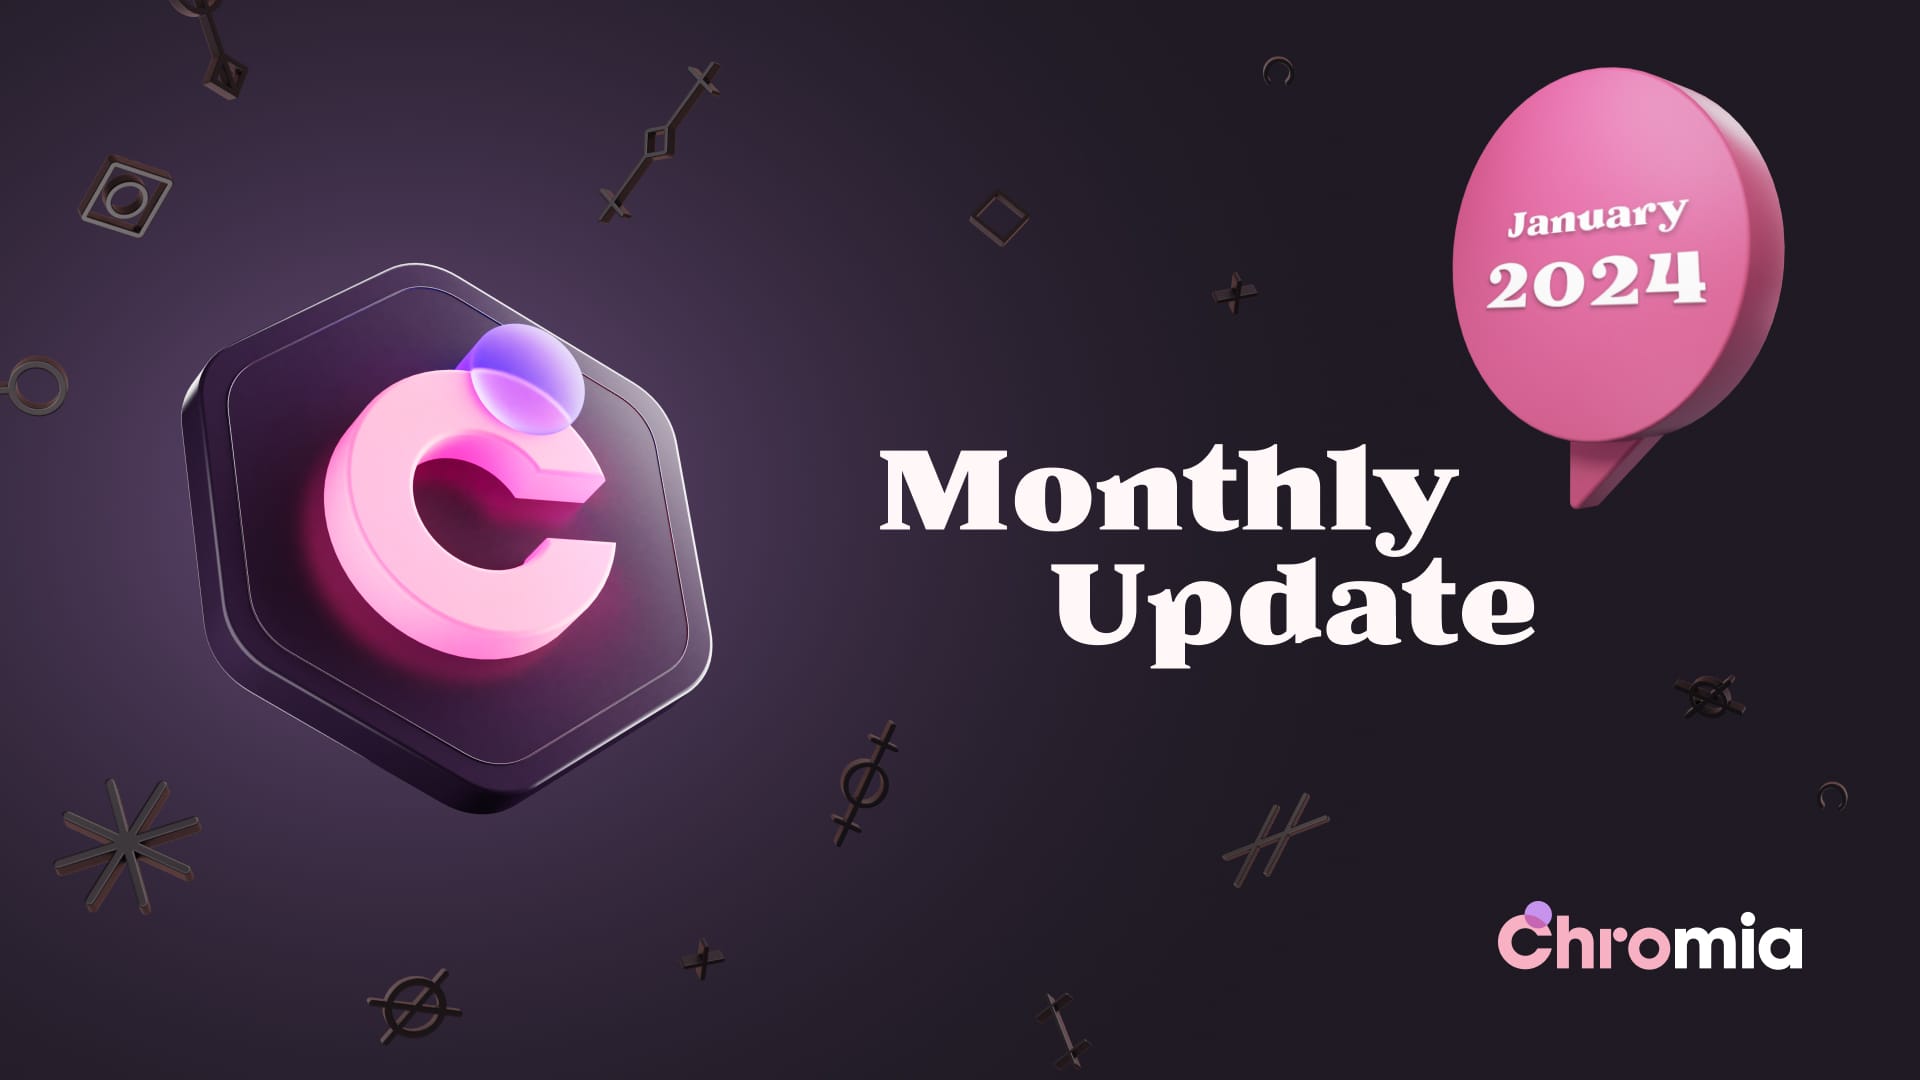 Chromia Monthly Update: January 2024